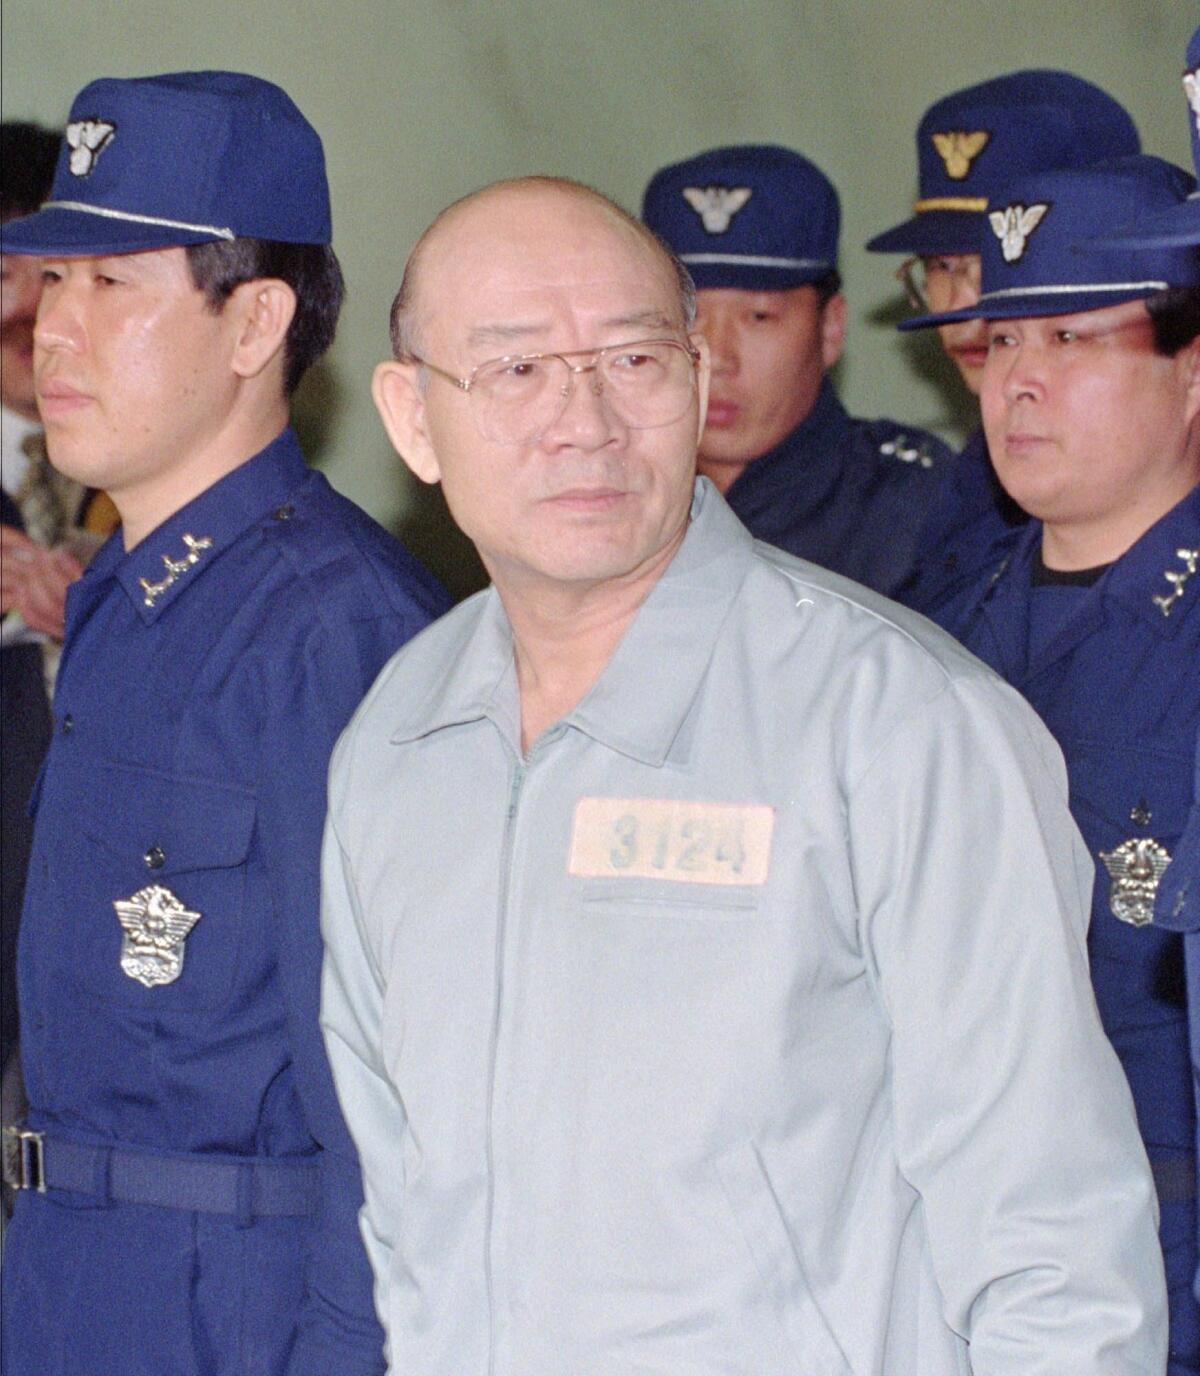 Former South Korean President Chun Doo-hwan, in a prison uniform, enters the Seoul Court House in 1996 for his first trial on charges stemming from a 1980 military coup and allegations of accepting secret funds.